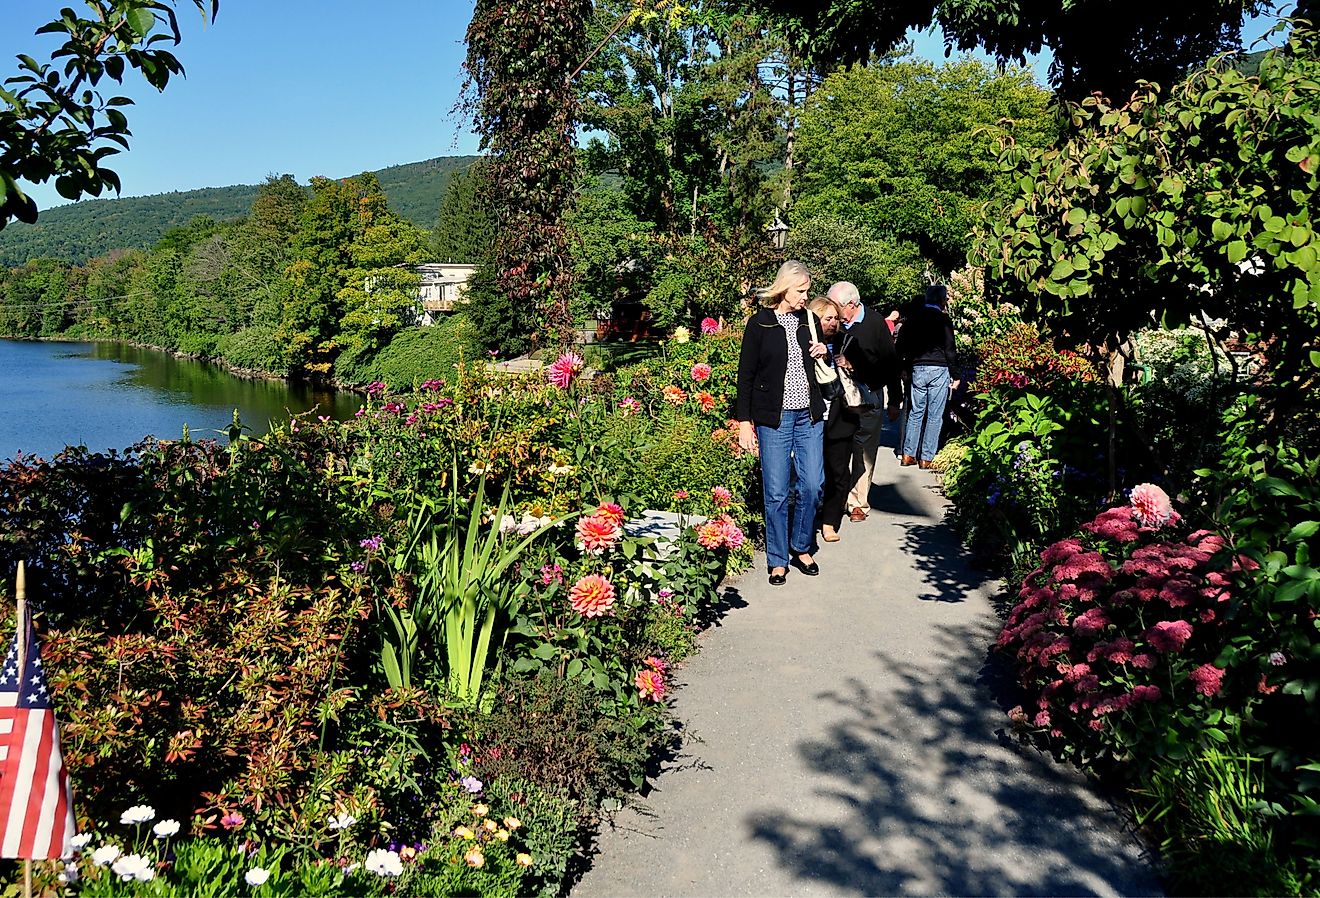 Visitors strolling along the former trolley span now the Bridge of Flowers over the Deerfield River in Shelburne Falls. Image credit LEE SNIDER PHOTO IMAGES via Shutterstock.